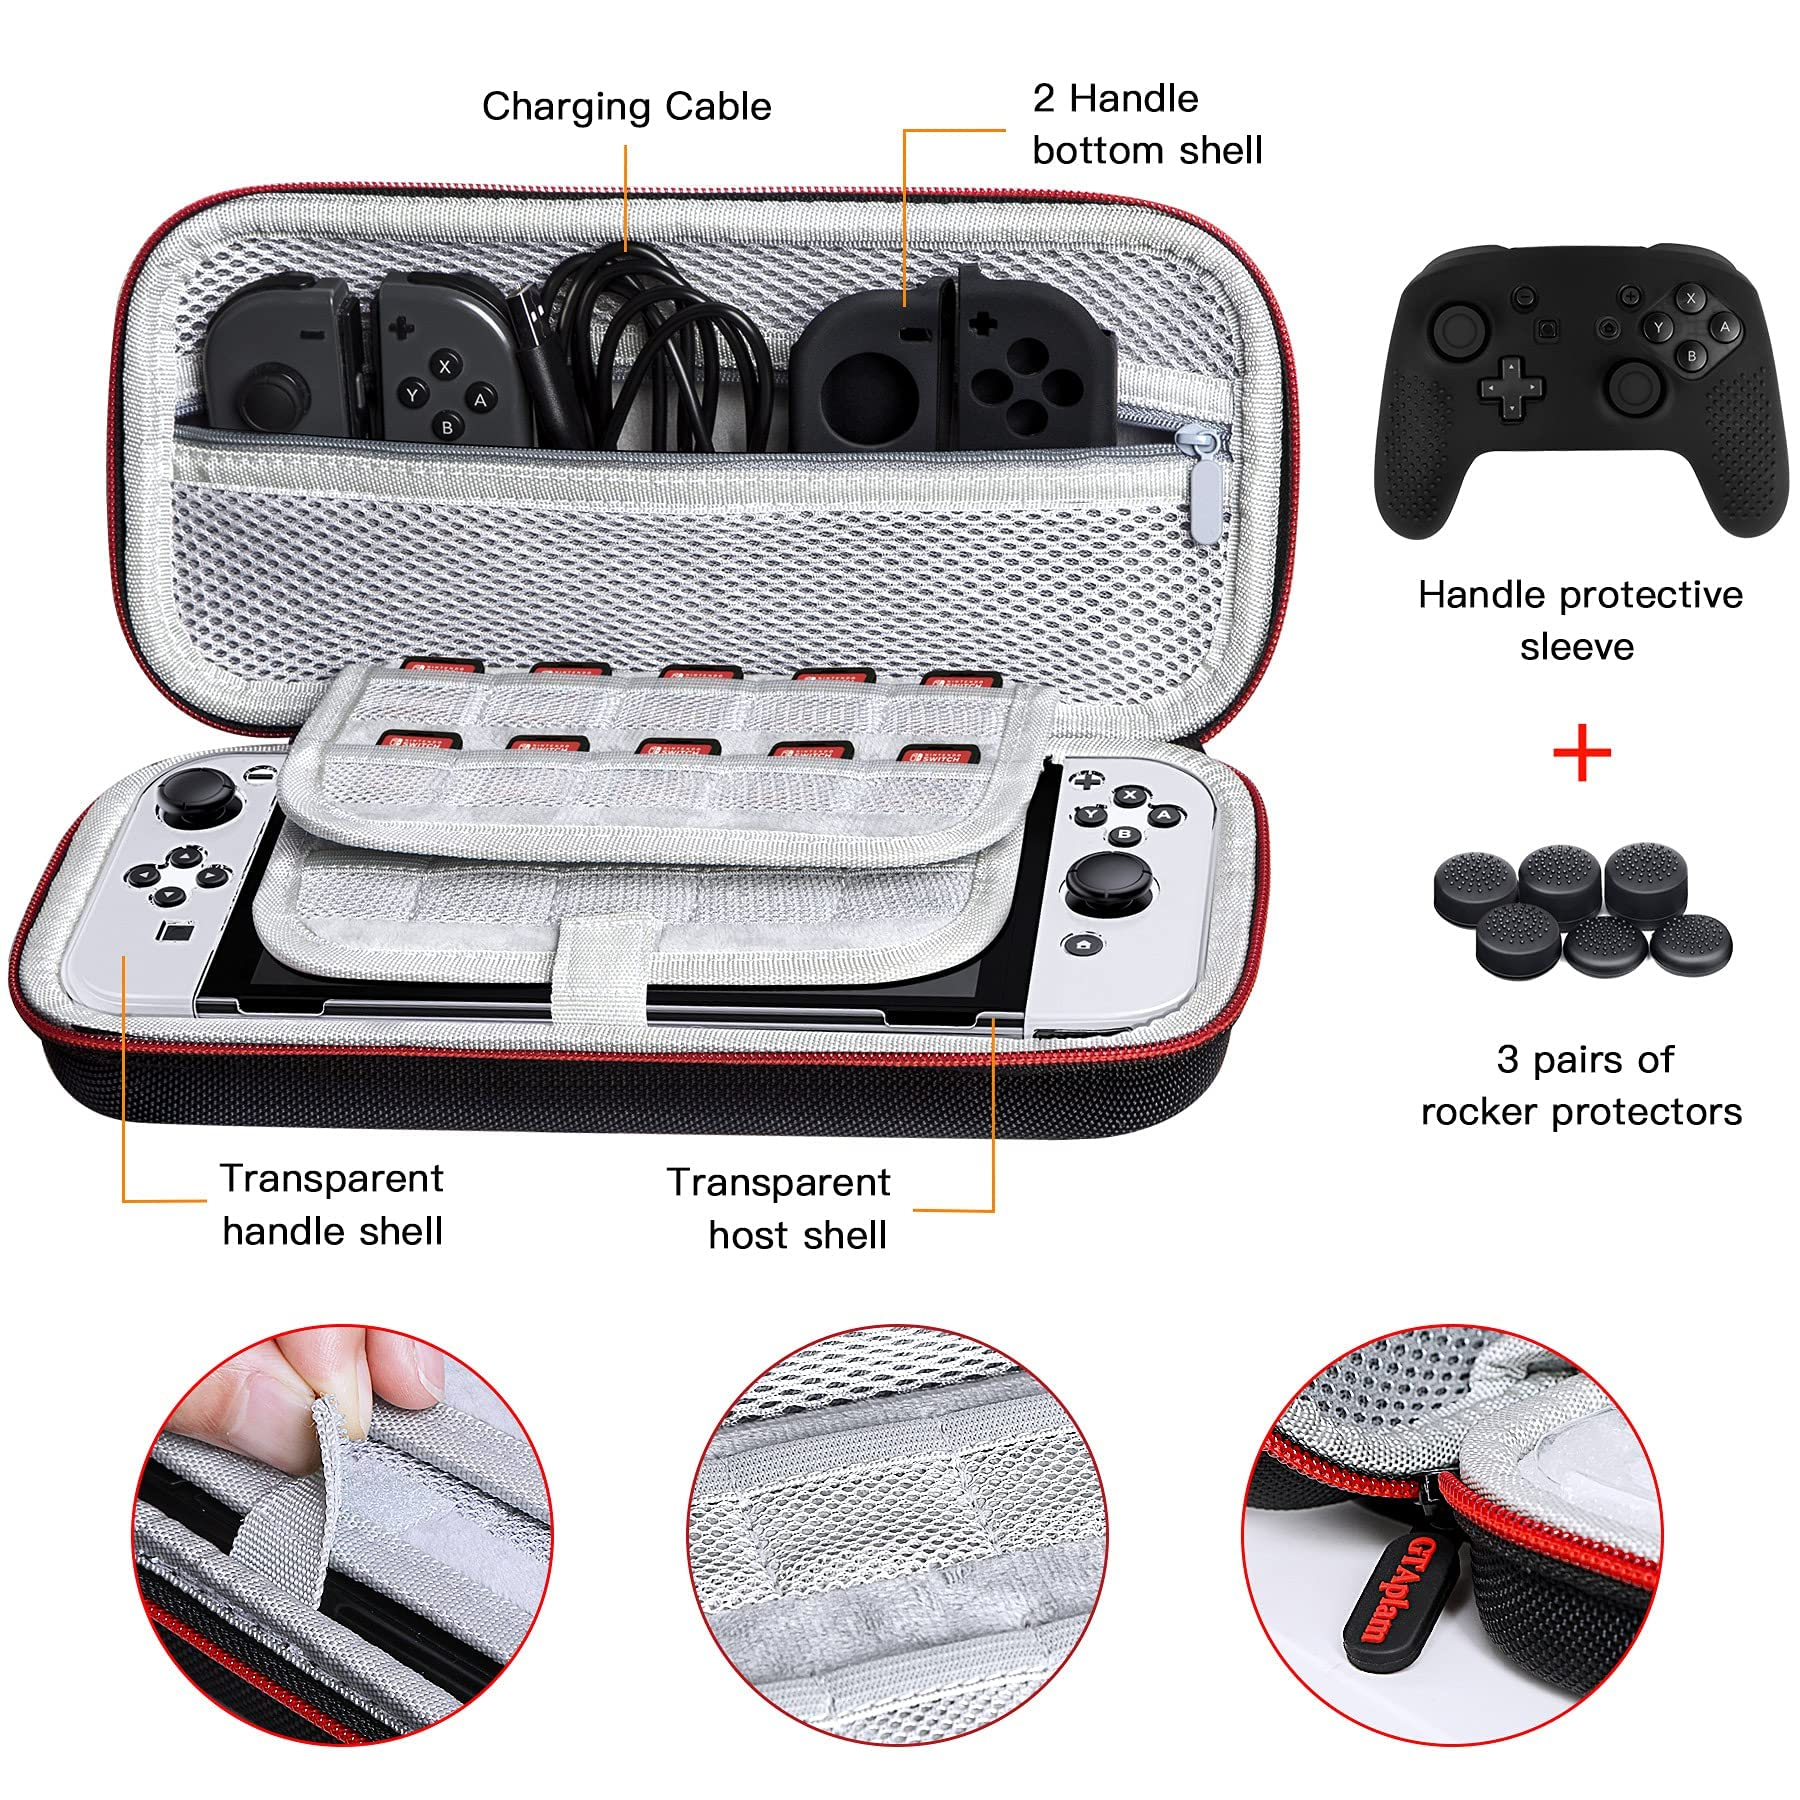 Gamers Kit for Nintendo Switch OLED: Wired Gaming Headset with 50mm  Drivers, (2)Screen Protectors, Ergonomic Grip, Switch OLED Travel Case,  Joy-Con